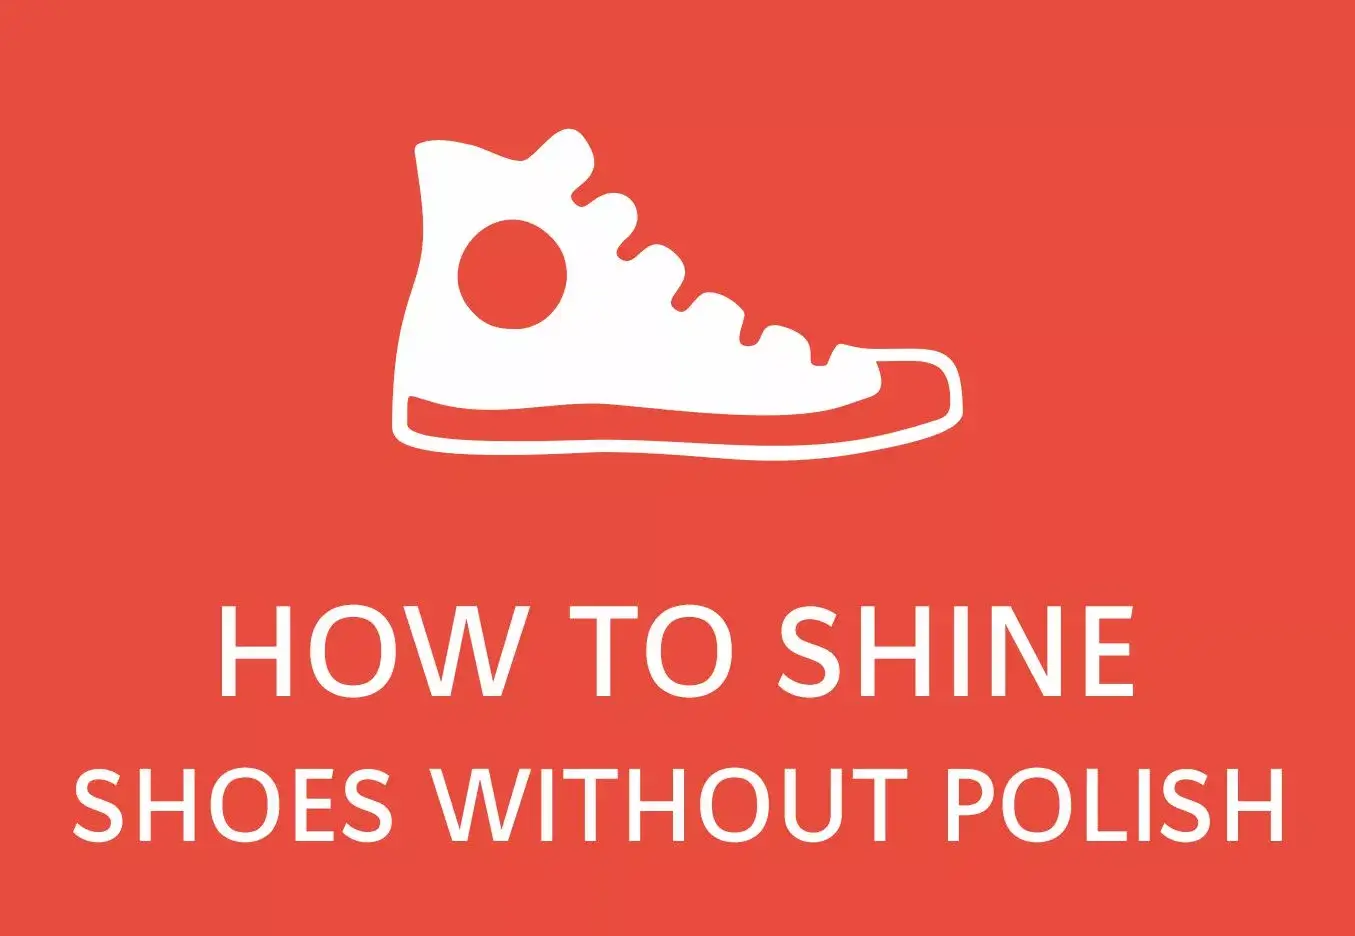 How to shine shoes without polish